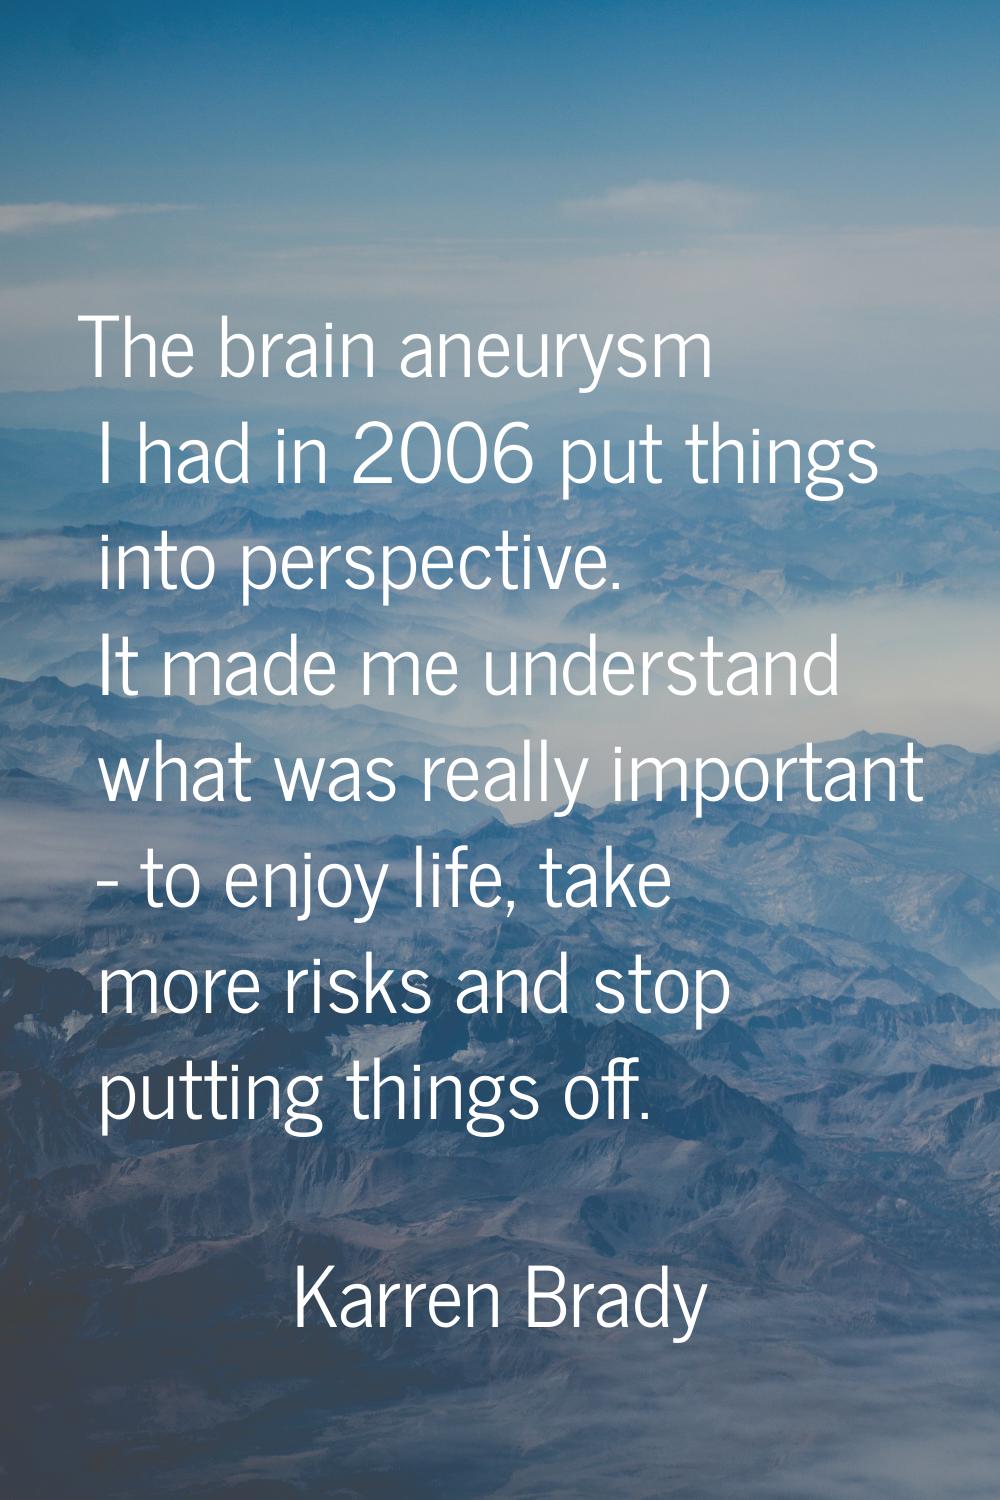 The brain aneurysm I had in 2006 put things into perspective. It made me understand what was really